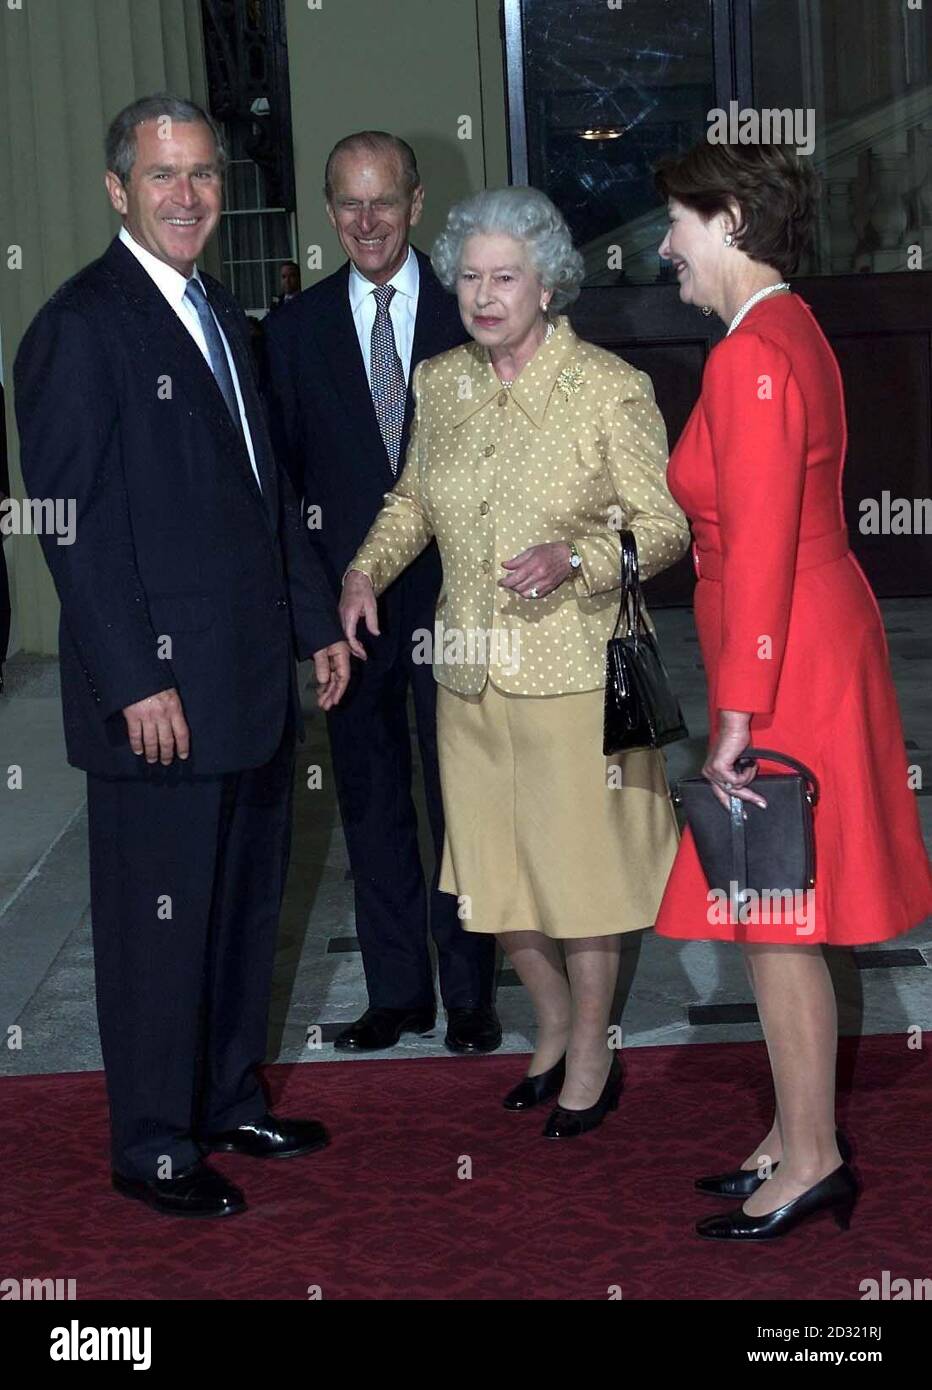 America's President Bush (left) is greeted by Britain's Queen Elizabeth II and the Duke of Edinbugh as he arrives out of the rain with his wife, Laura, at Buckingham Palace for lunch.    * The US president is on his first visit to the United Kingdom, before travelling on to the G8 summit in Genoa. Stock Photo